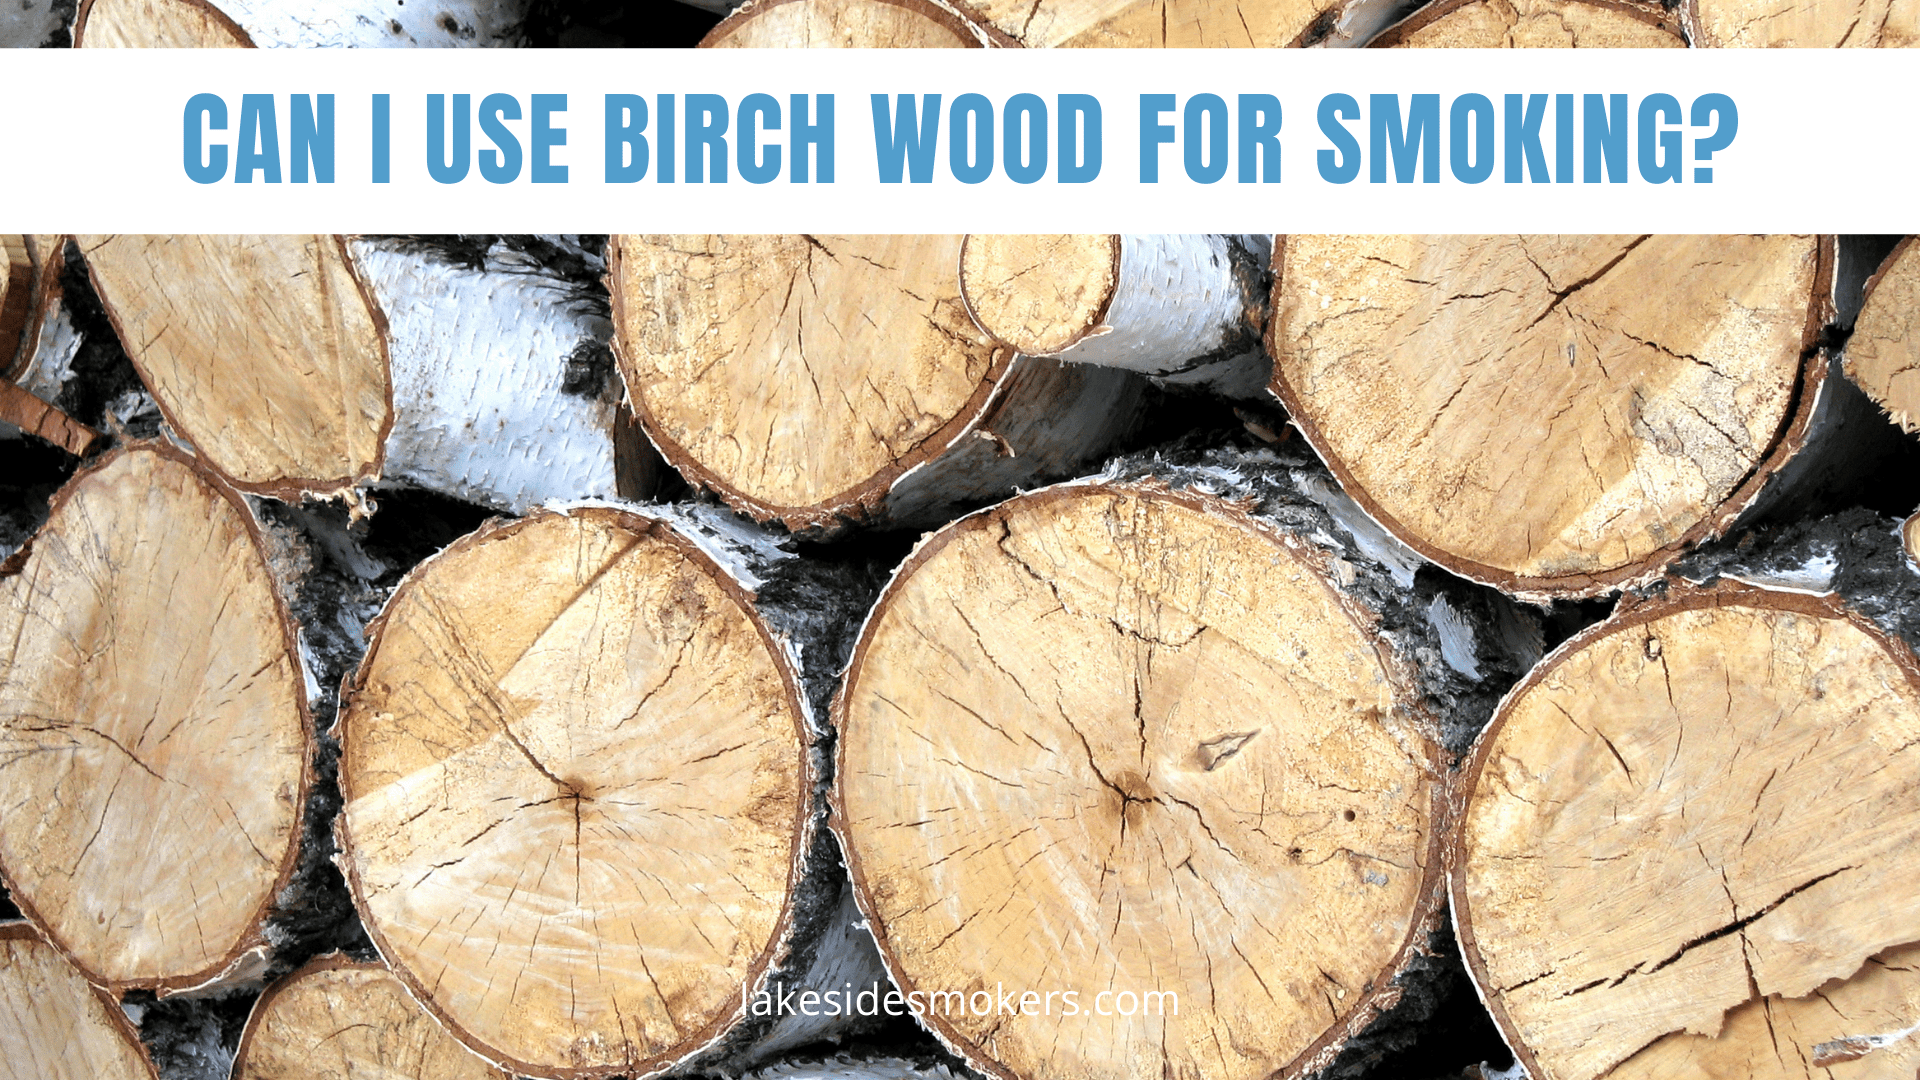 Can I use birch wood for smoking? Silver birch is a good choice